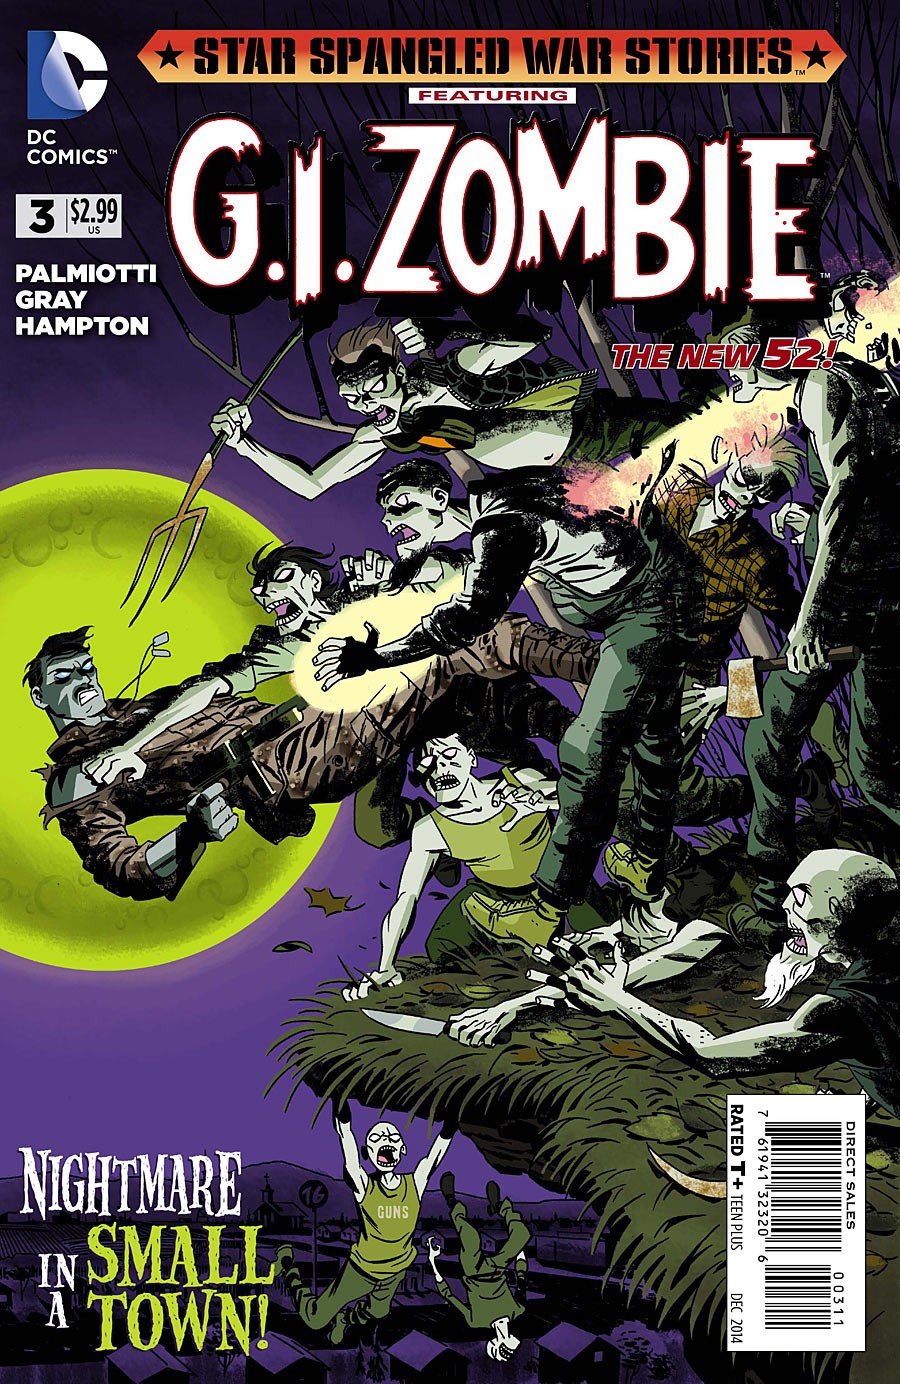 Star-Spangled War Stories Featuring G.I. Zombie Vol. 1 #3